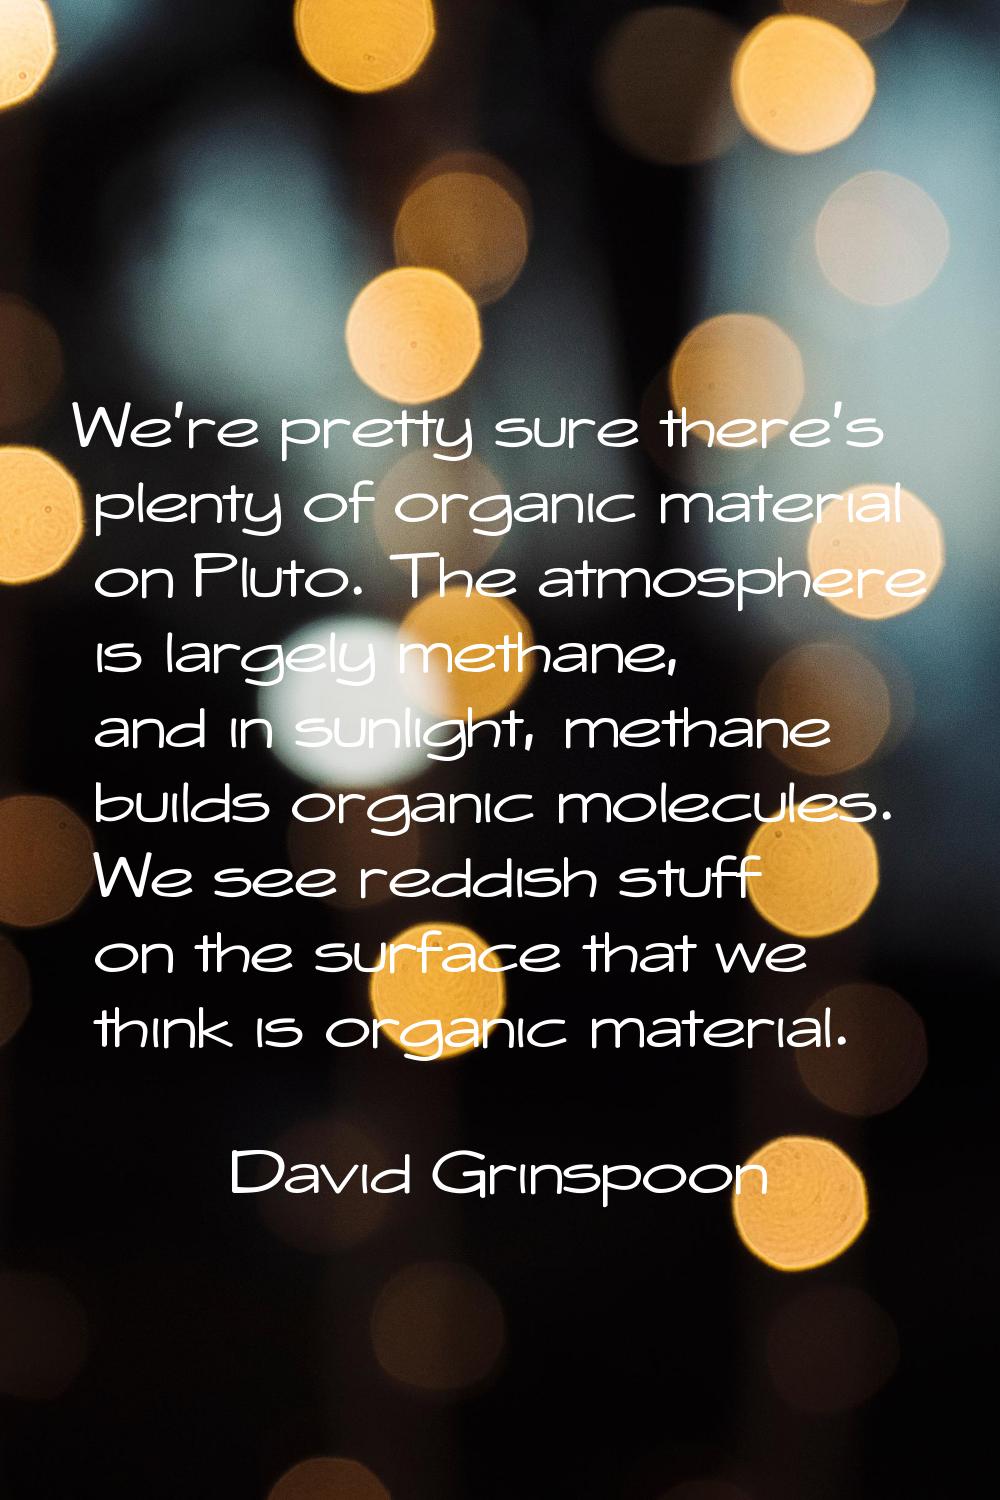 We're pretty sure there's plenty of organic material on Pluto. The atmosphere is largely methane, a